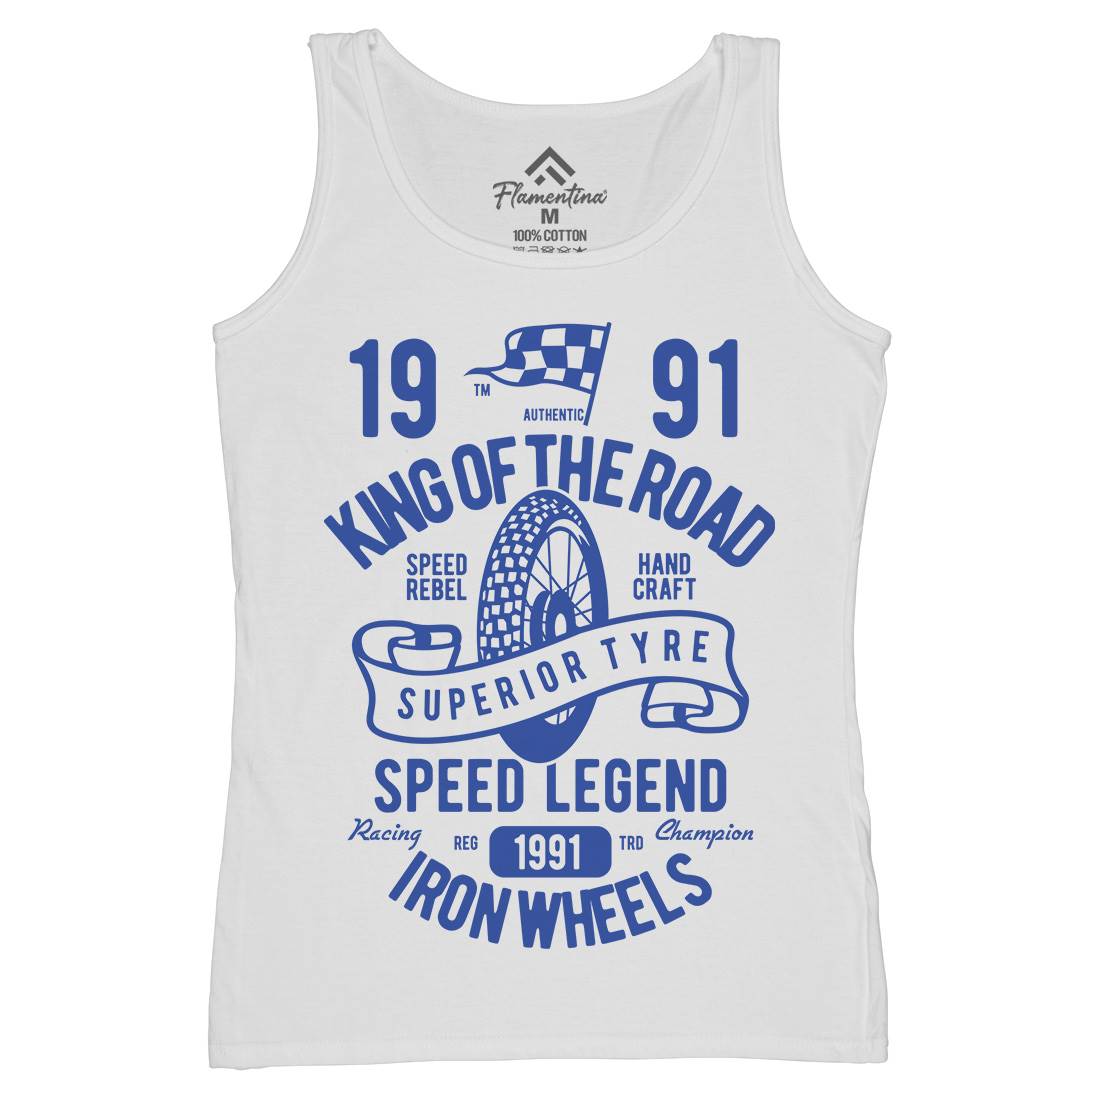 Superior Tyre King Of The Road Womens Organic Tank Top Vest Motorcycles B458